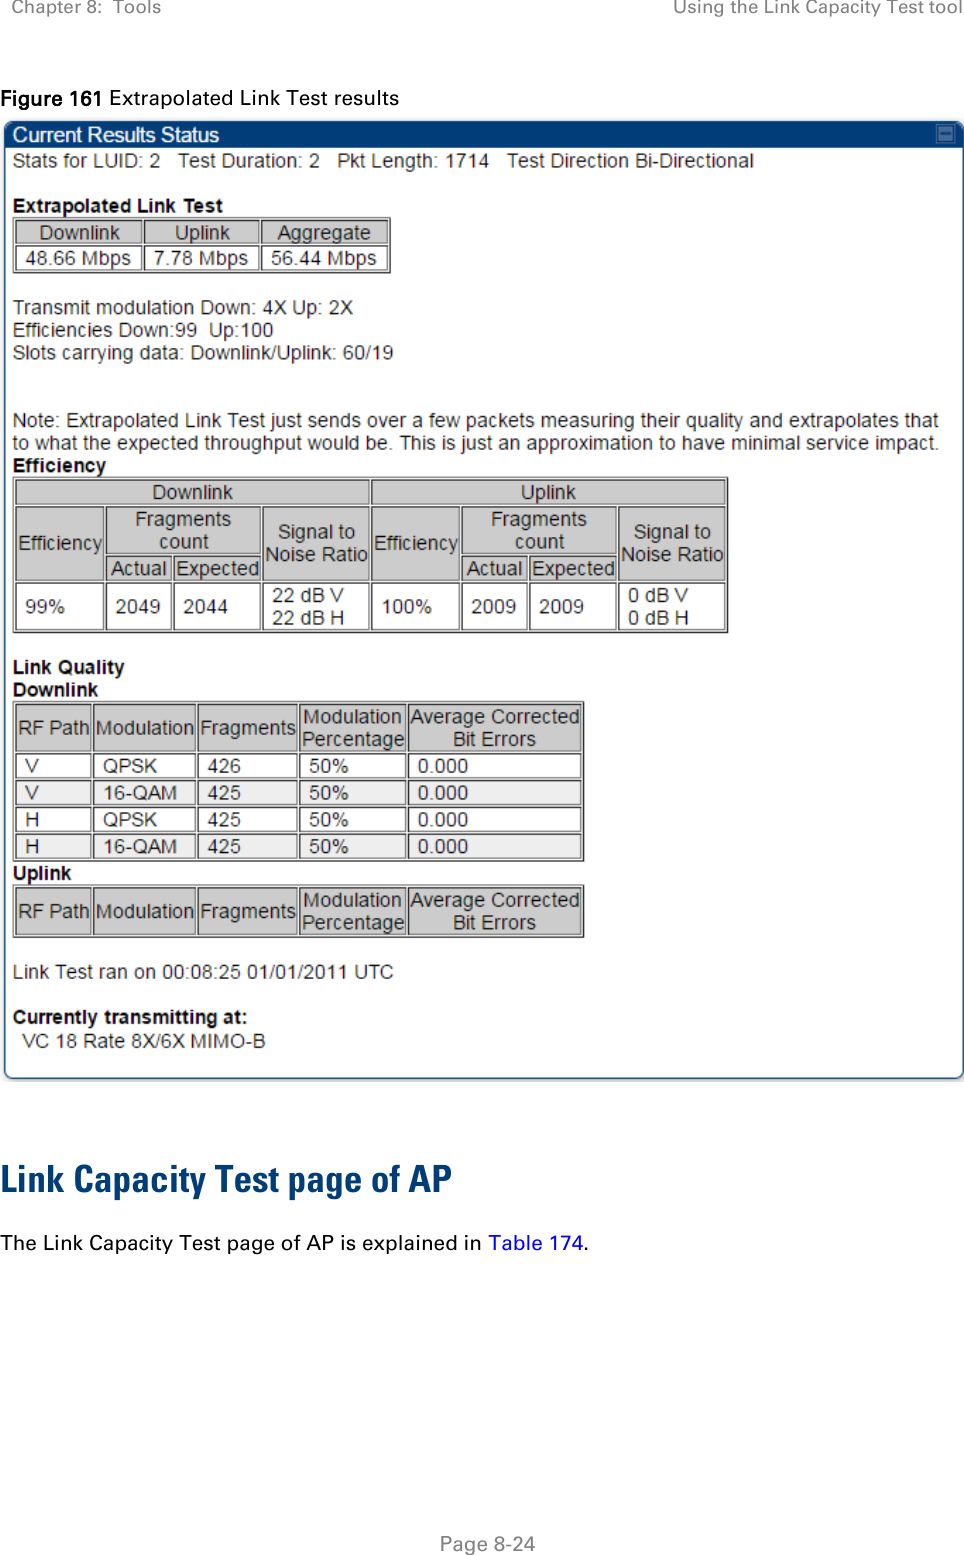 Chapter 8:  Tools Using the Link Capacity Test tool   Page 8-24 Figure 161 Extrapolated Link Test results   Link Capacity Test page of AP The Link Capacity Test page of AP is explained in Table 174. 